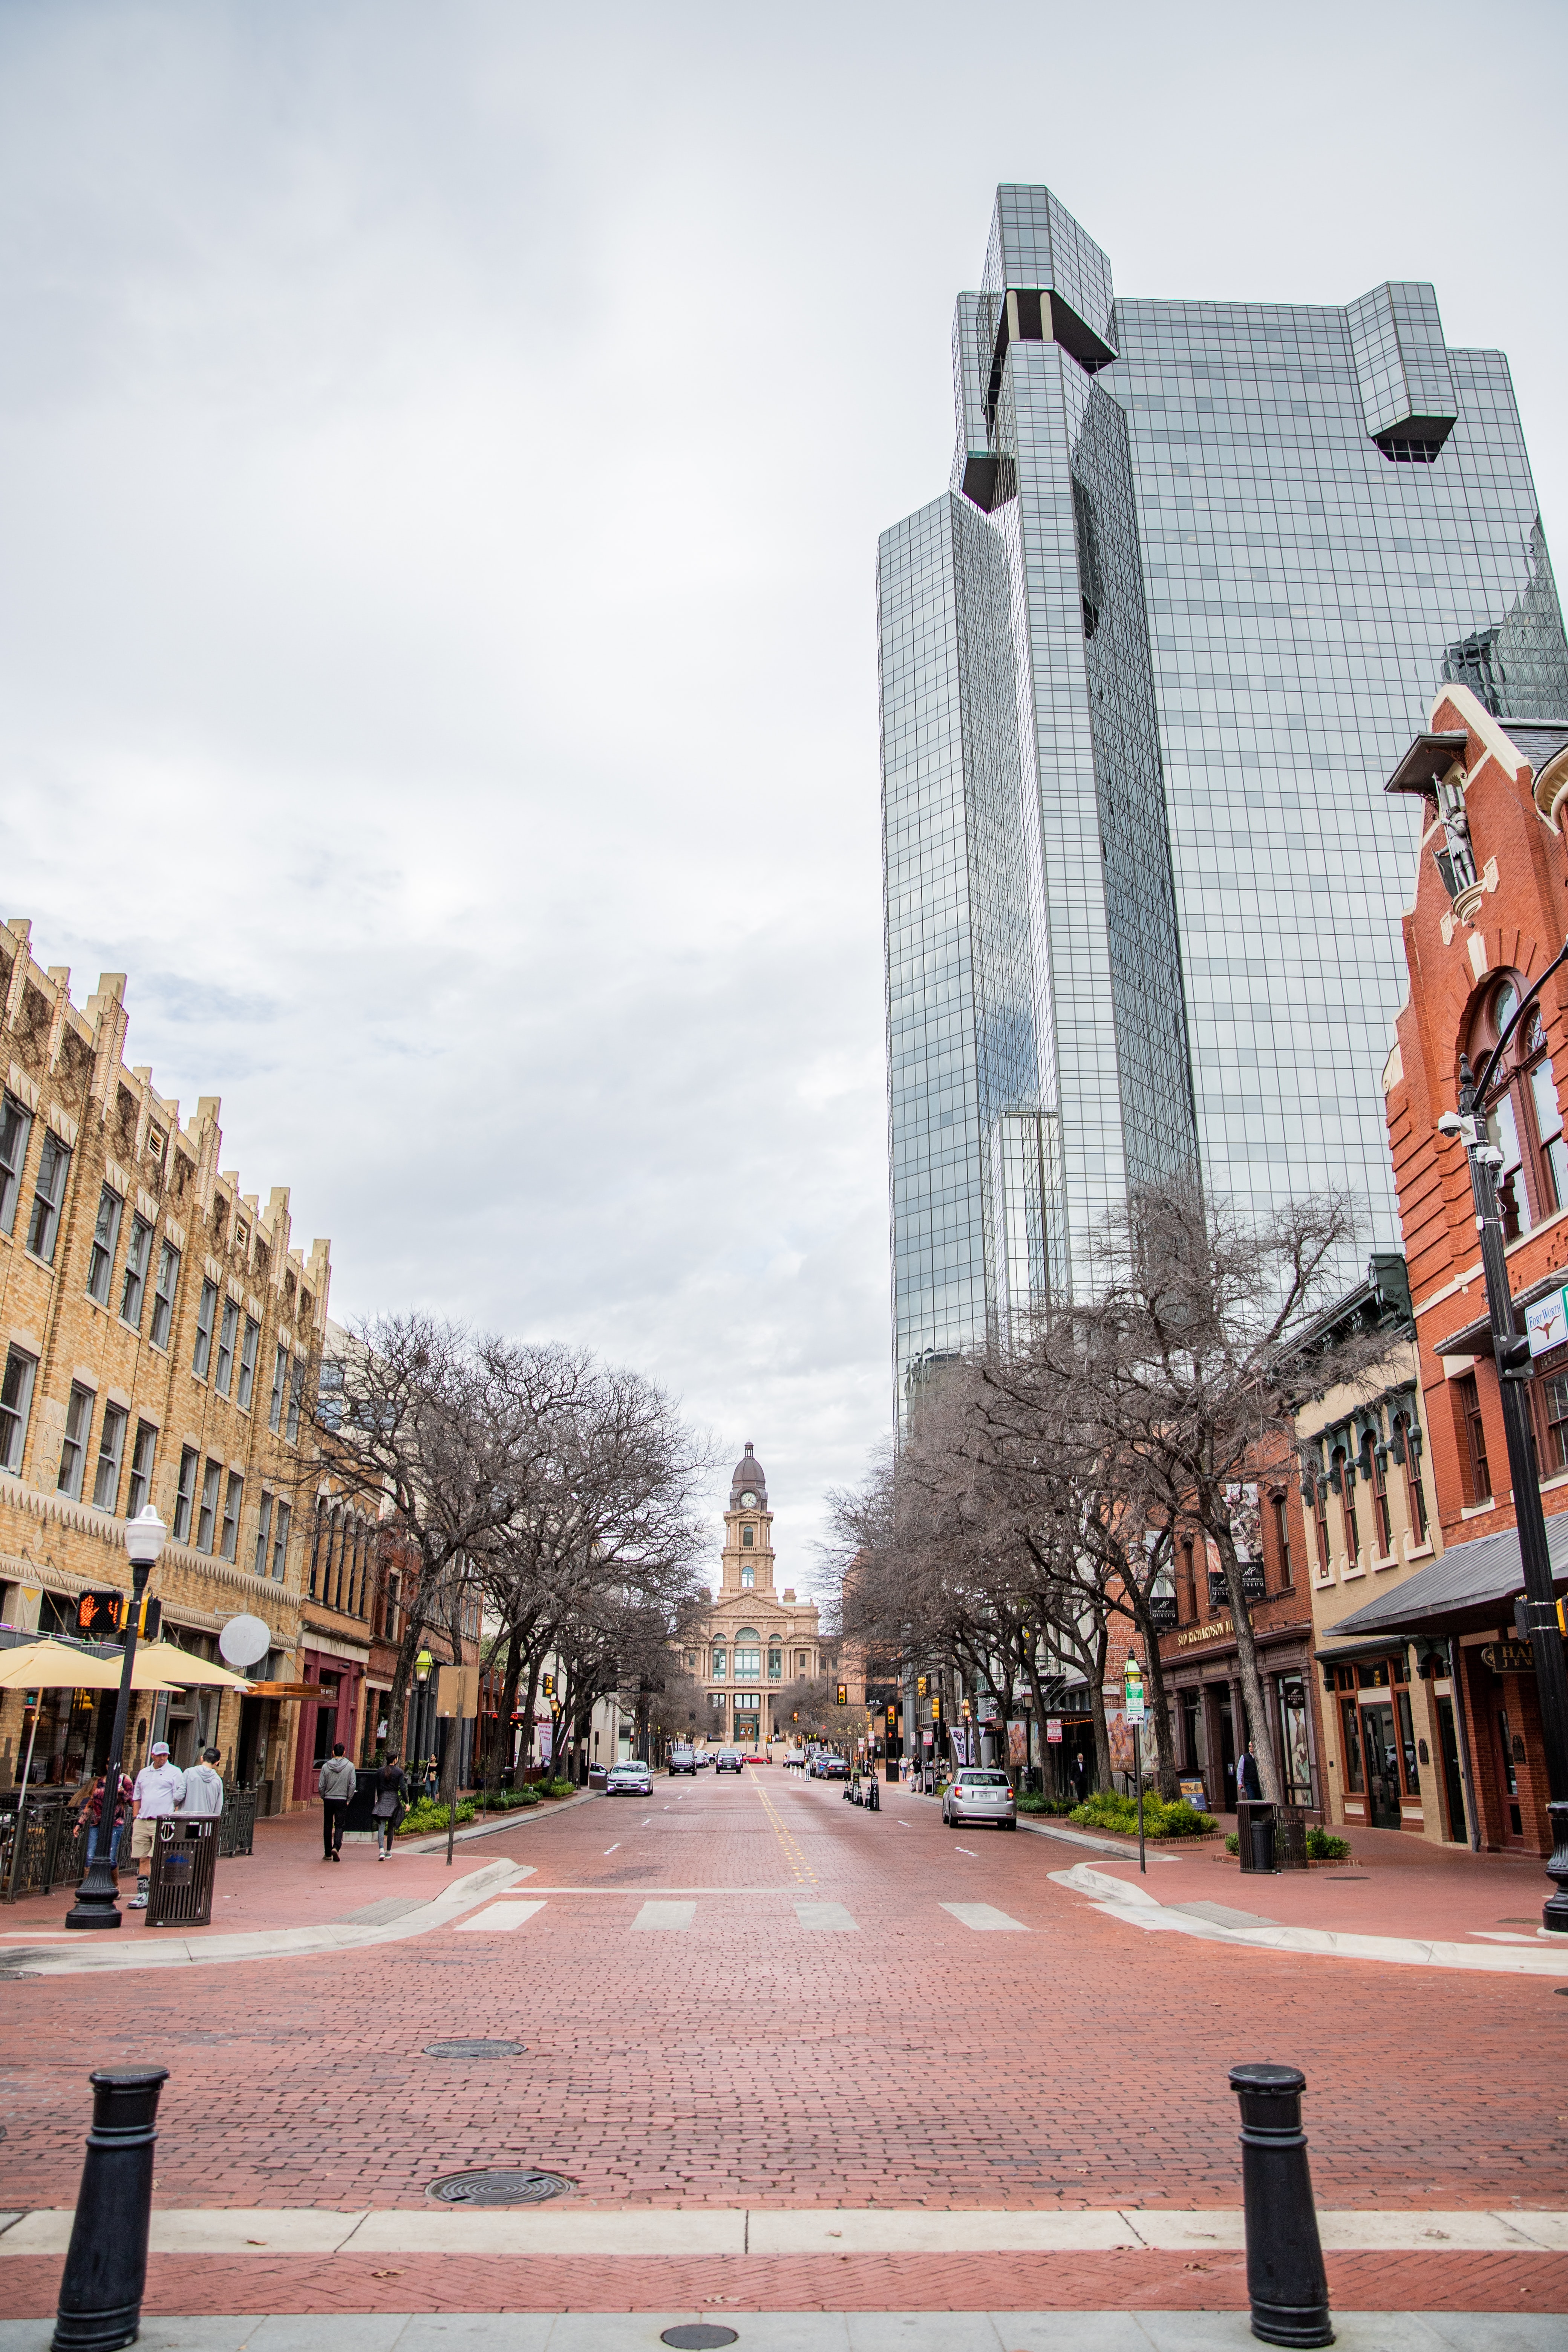 Top 10 Things To Do In Fort Worth, Texas 2022